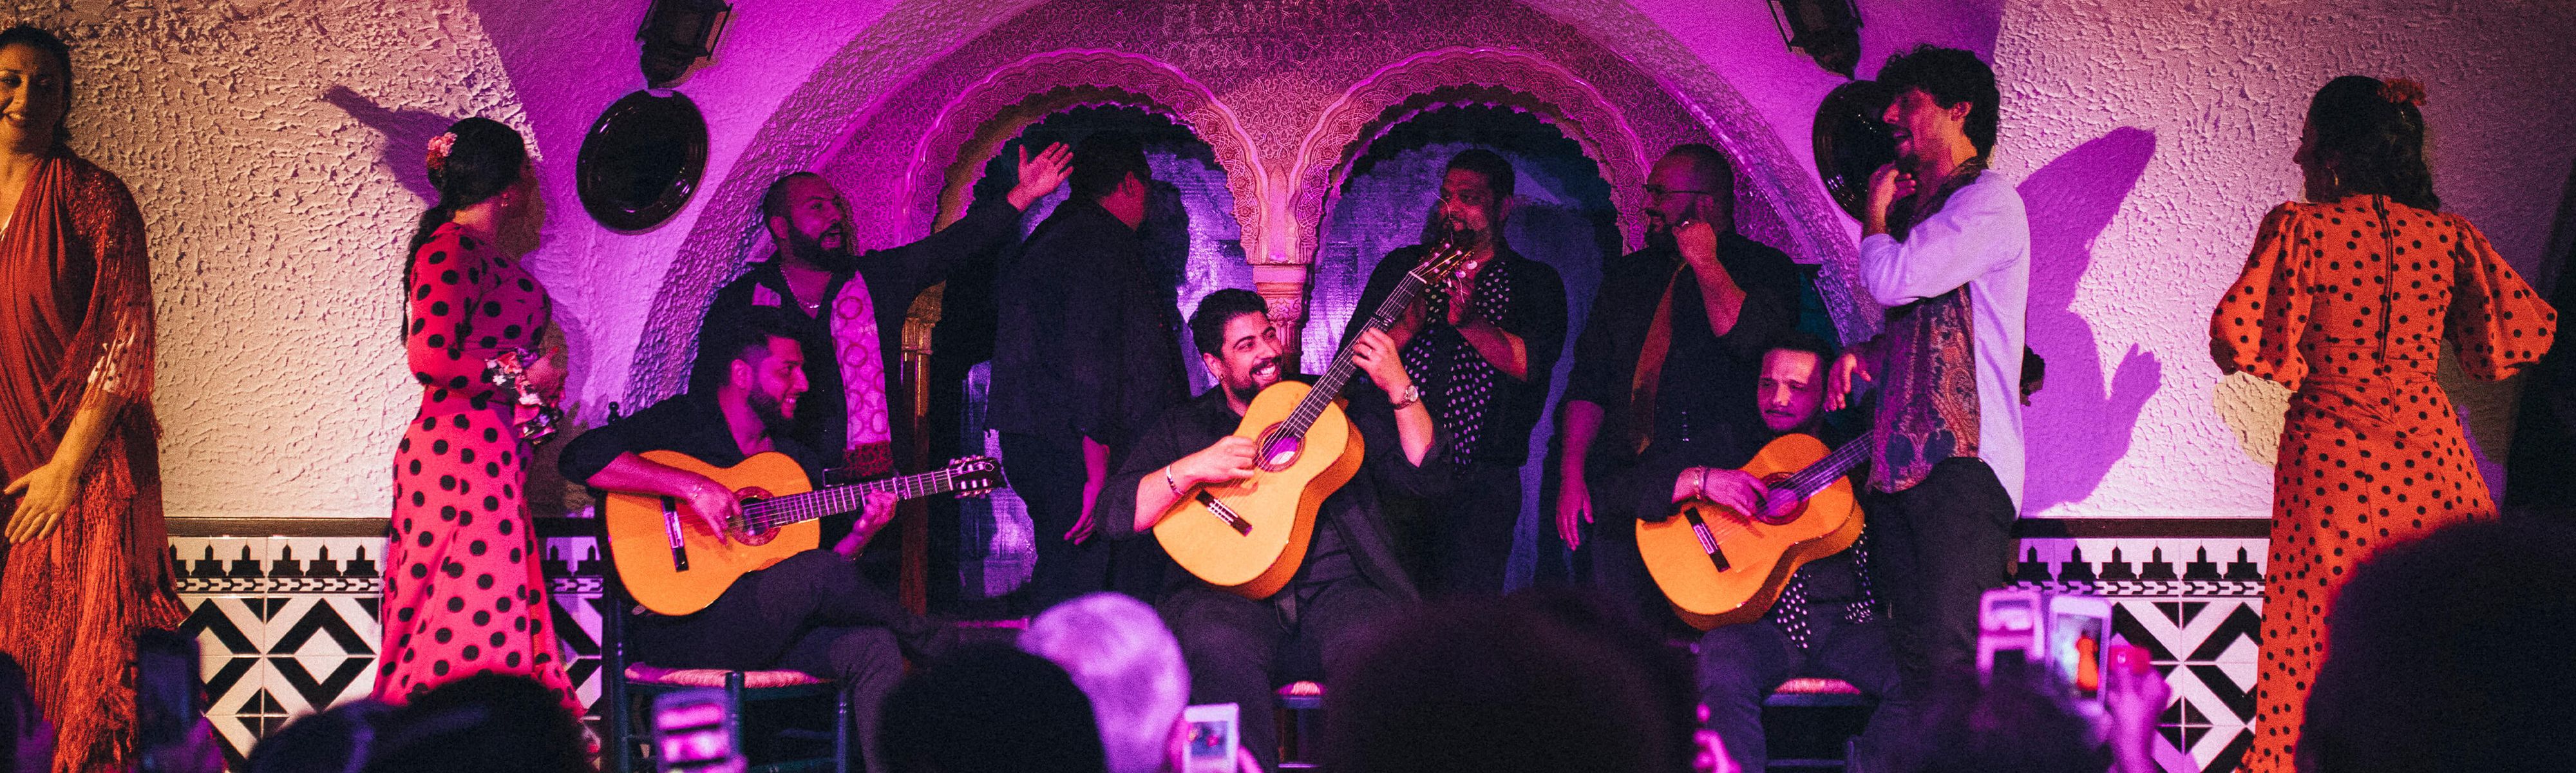 people in spain performing a flamenco show